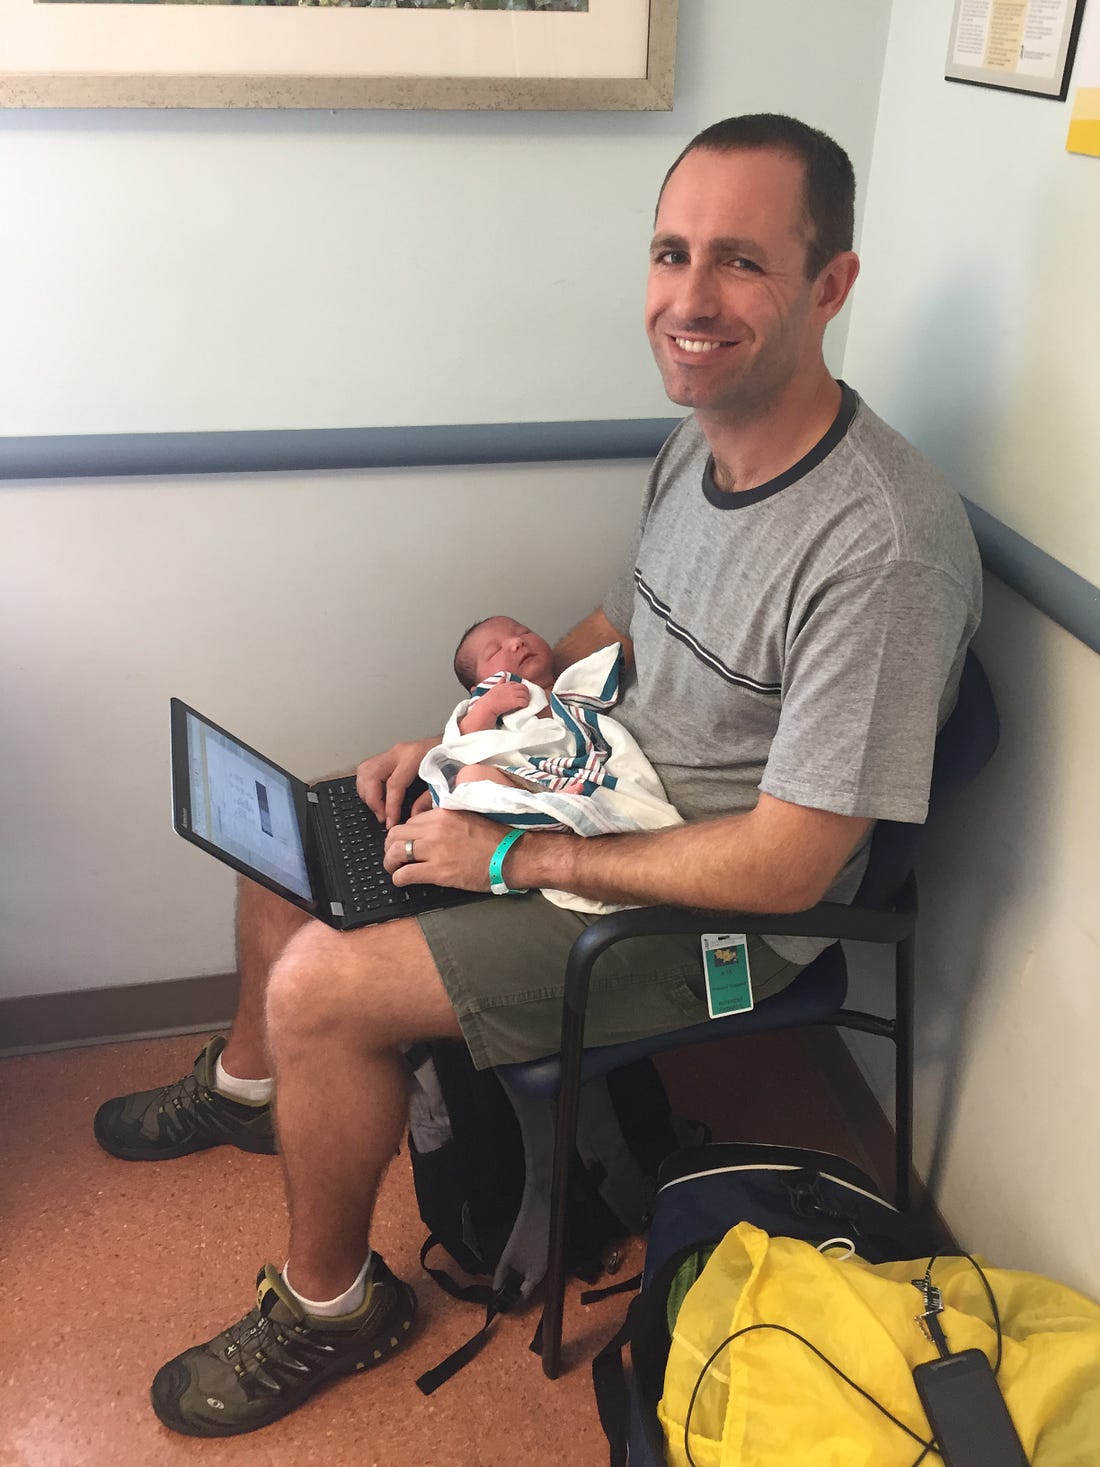 Photo of a man holding a baby while typing on a laptop.